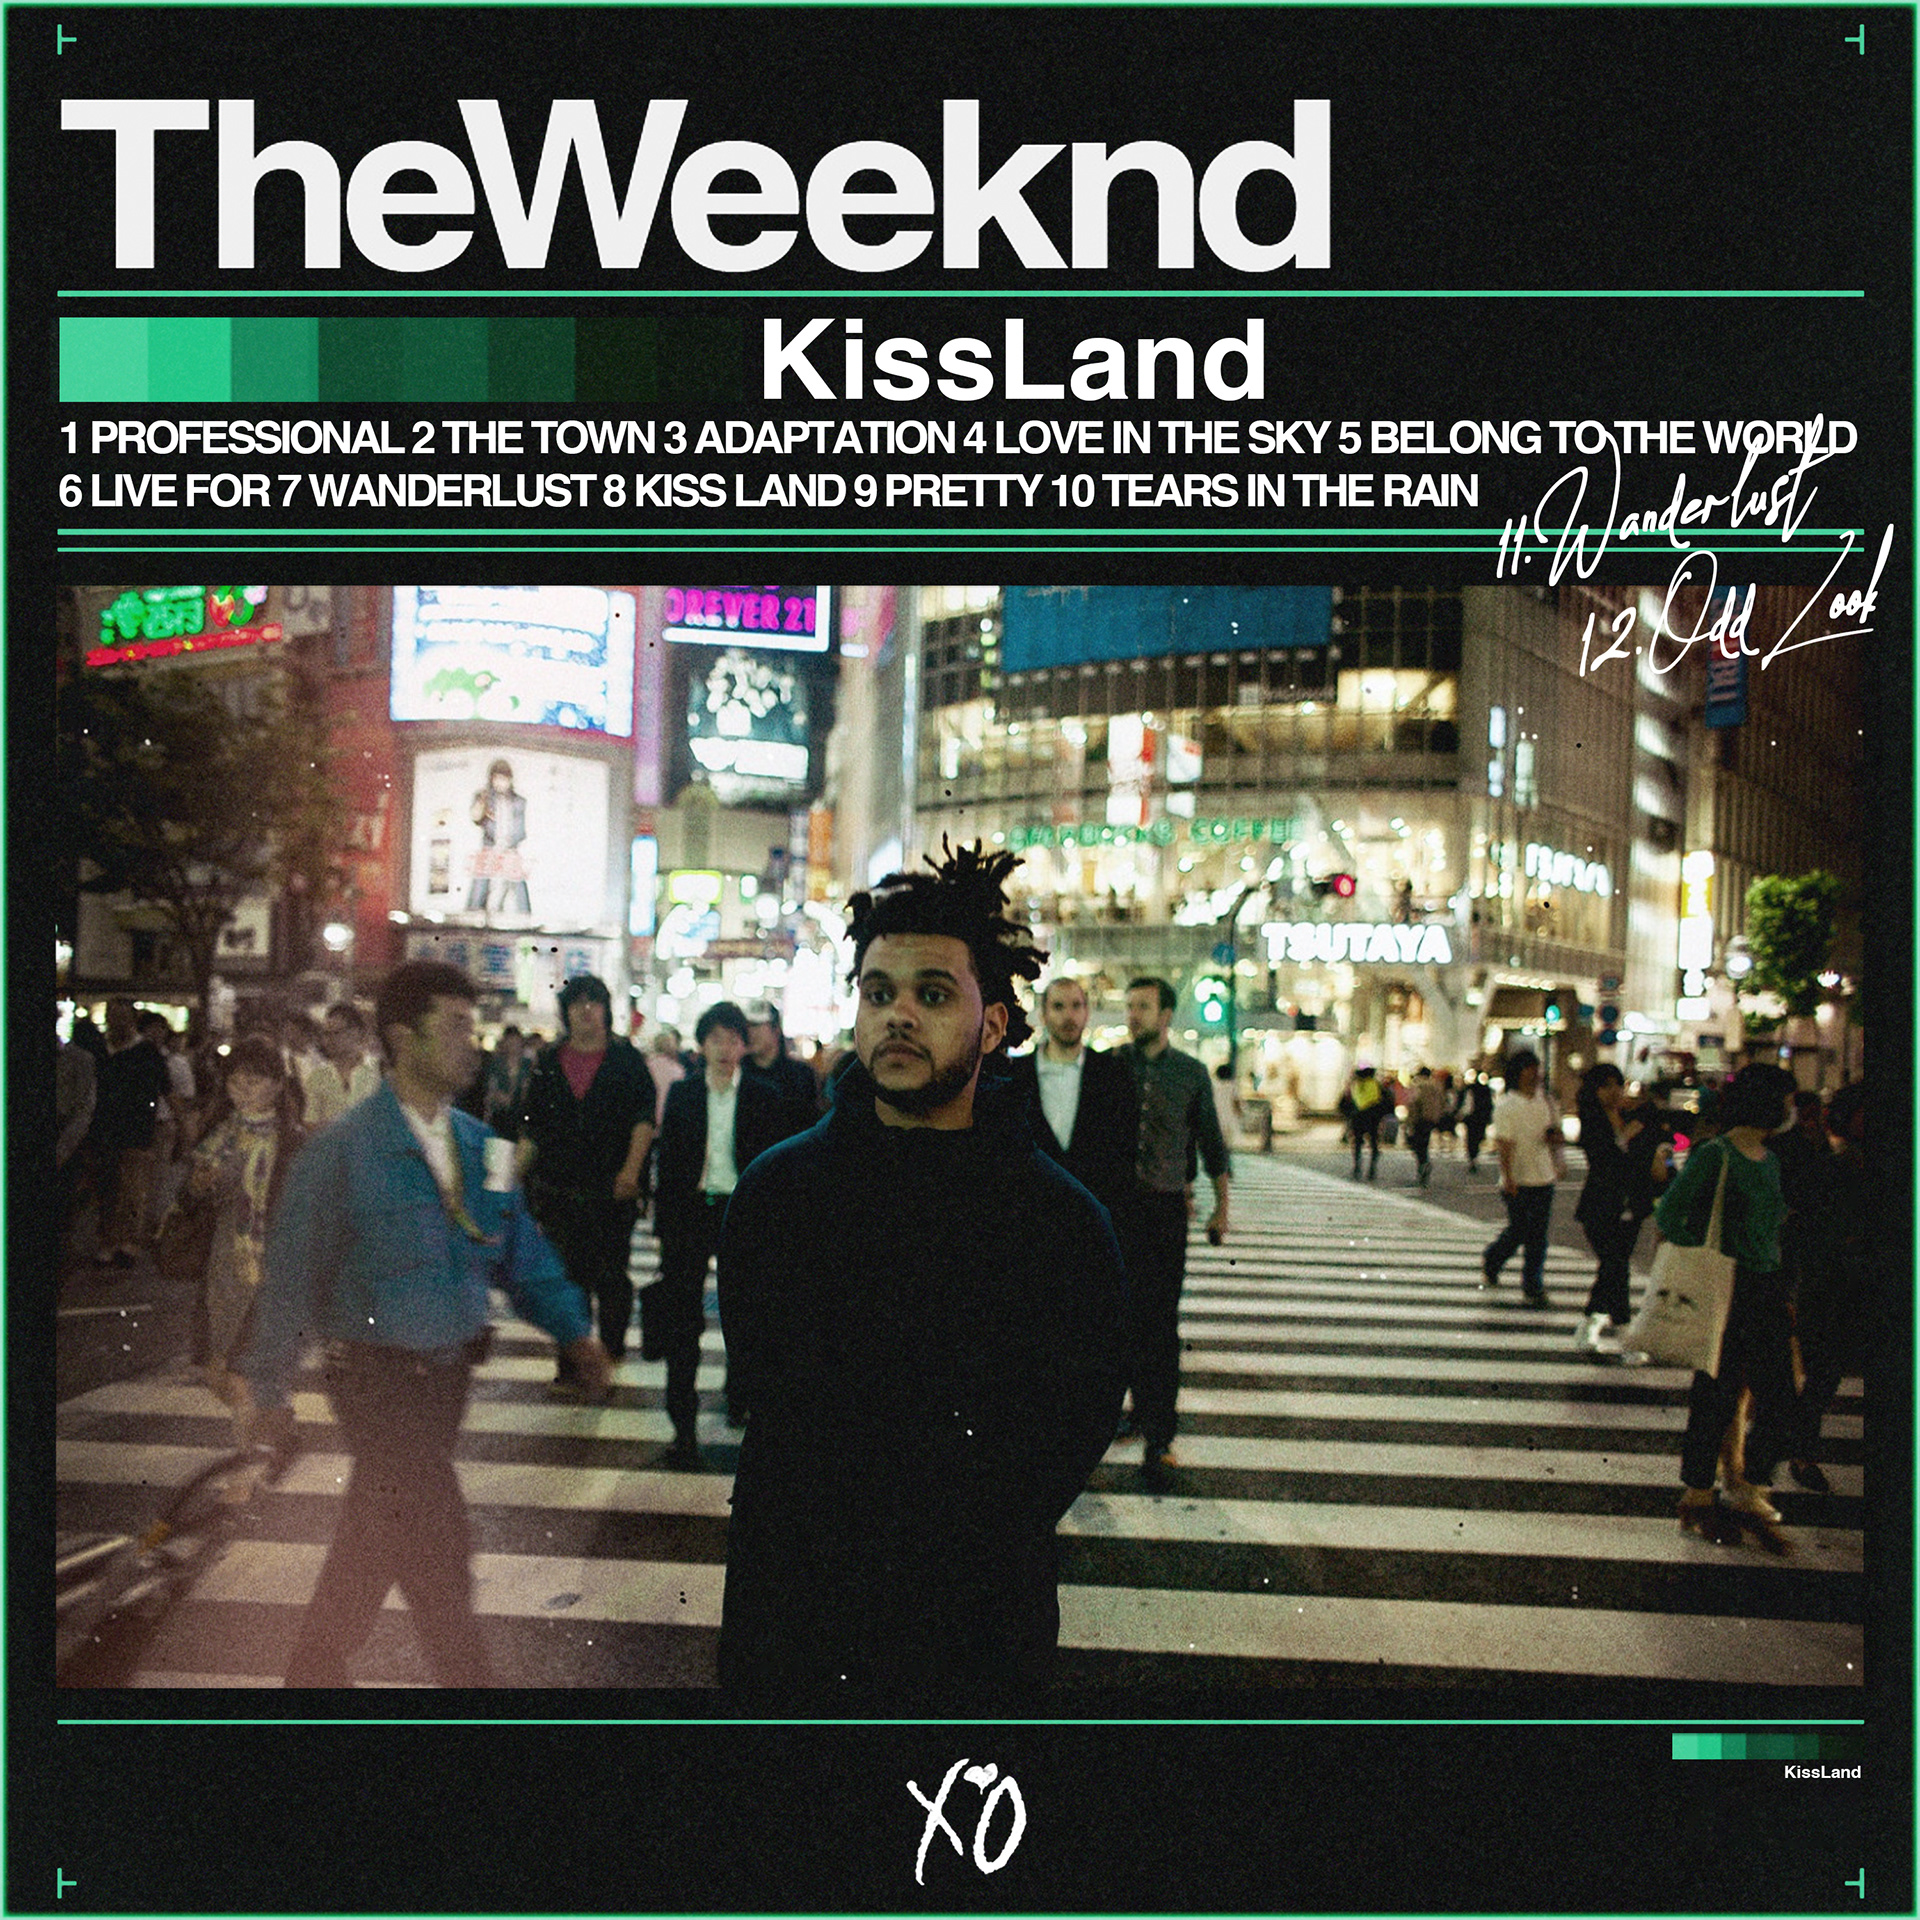 Aap tuberculose bang The Weeknd albums in the style of the Trilogy mixtapes | Behance